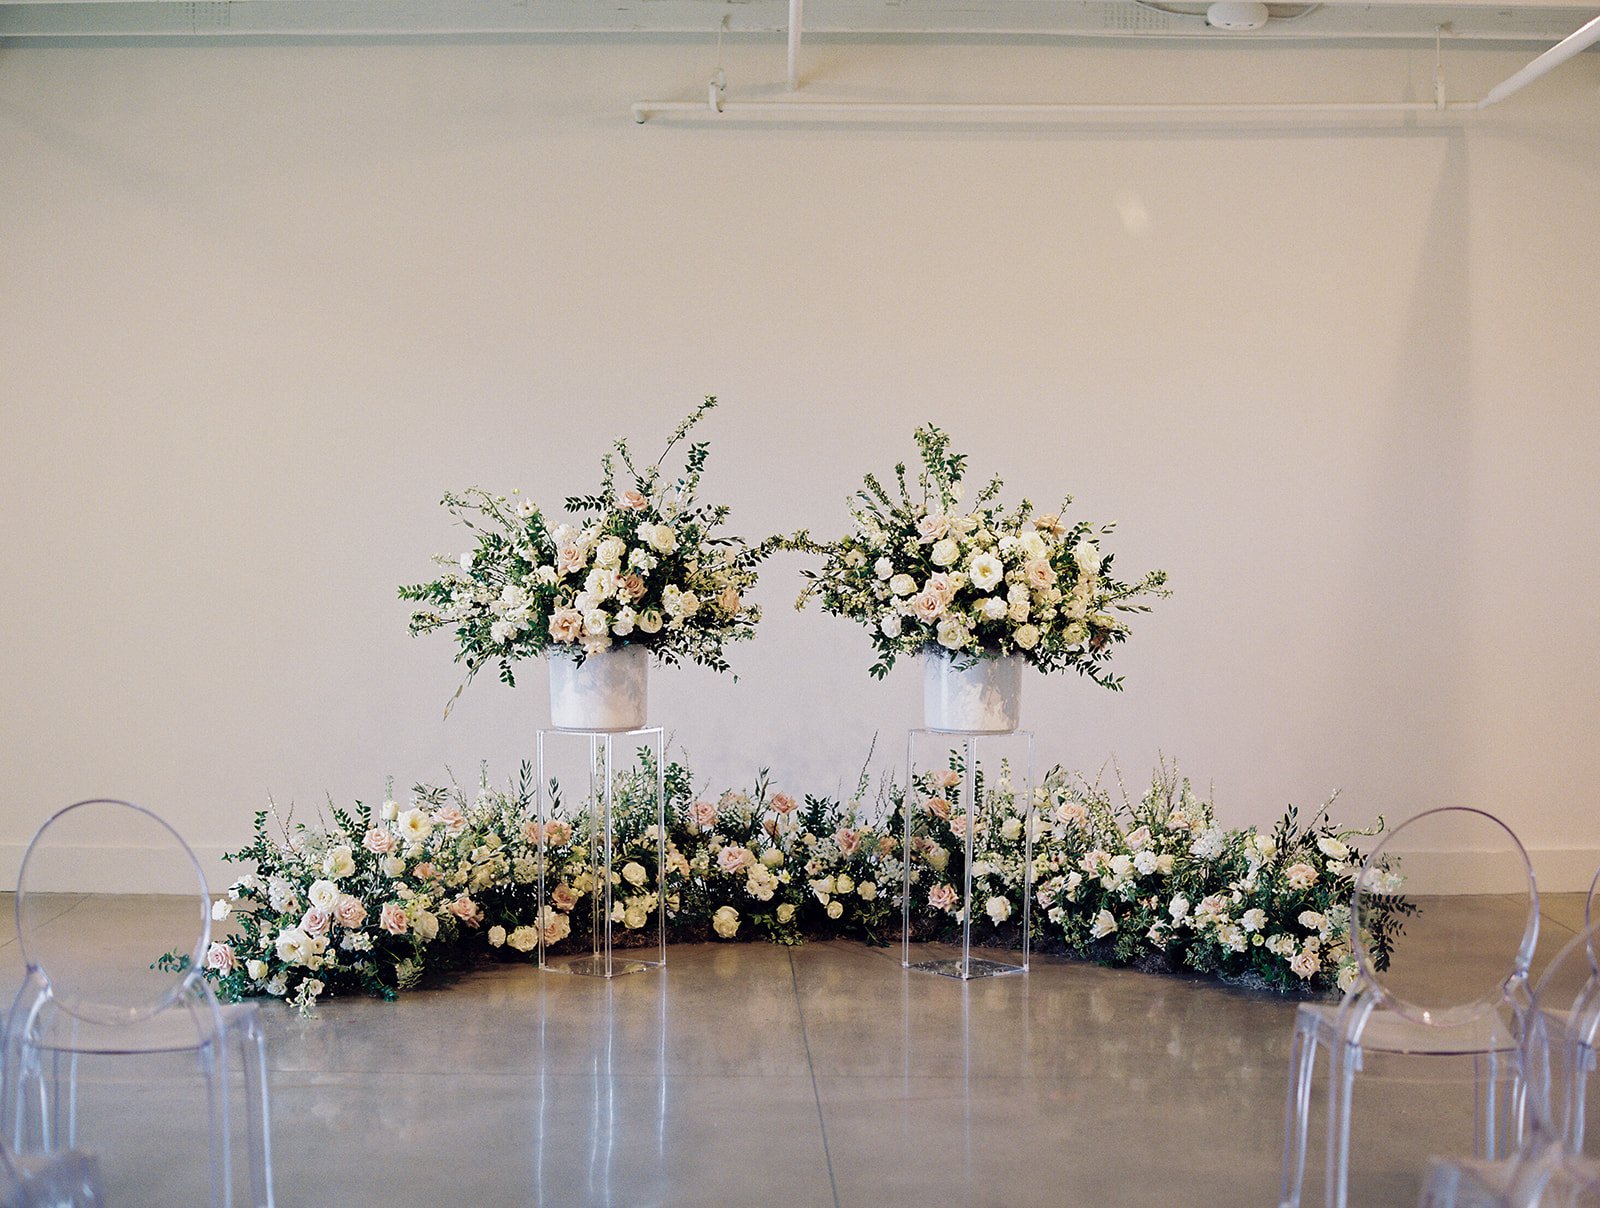 Lush ceremony installation featuring garden urns and meadows with petal heavy roses butterfly ranunculus, delphinium, and Queen Anne’s lace with natural, untamed greenery. Floral hues of white, cream, and blush. Designed by Rosemary and Finch in Nash